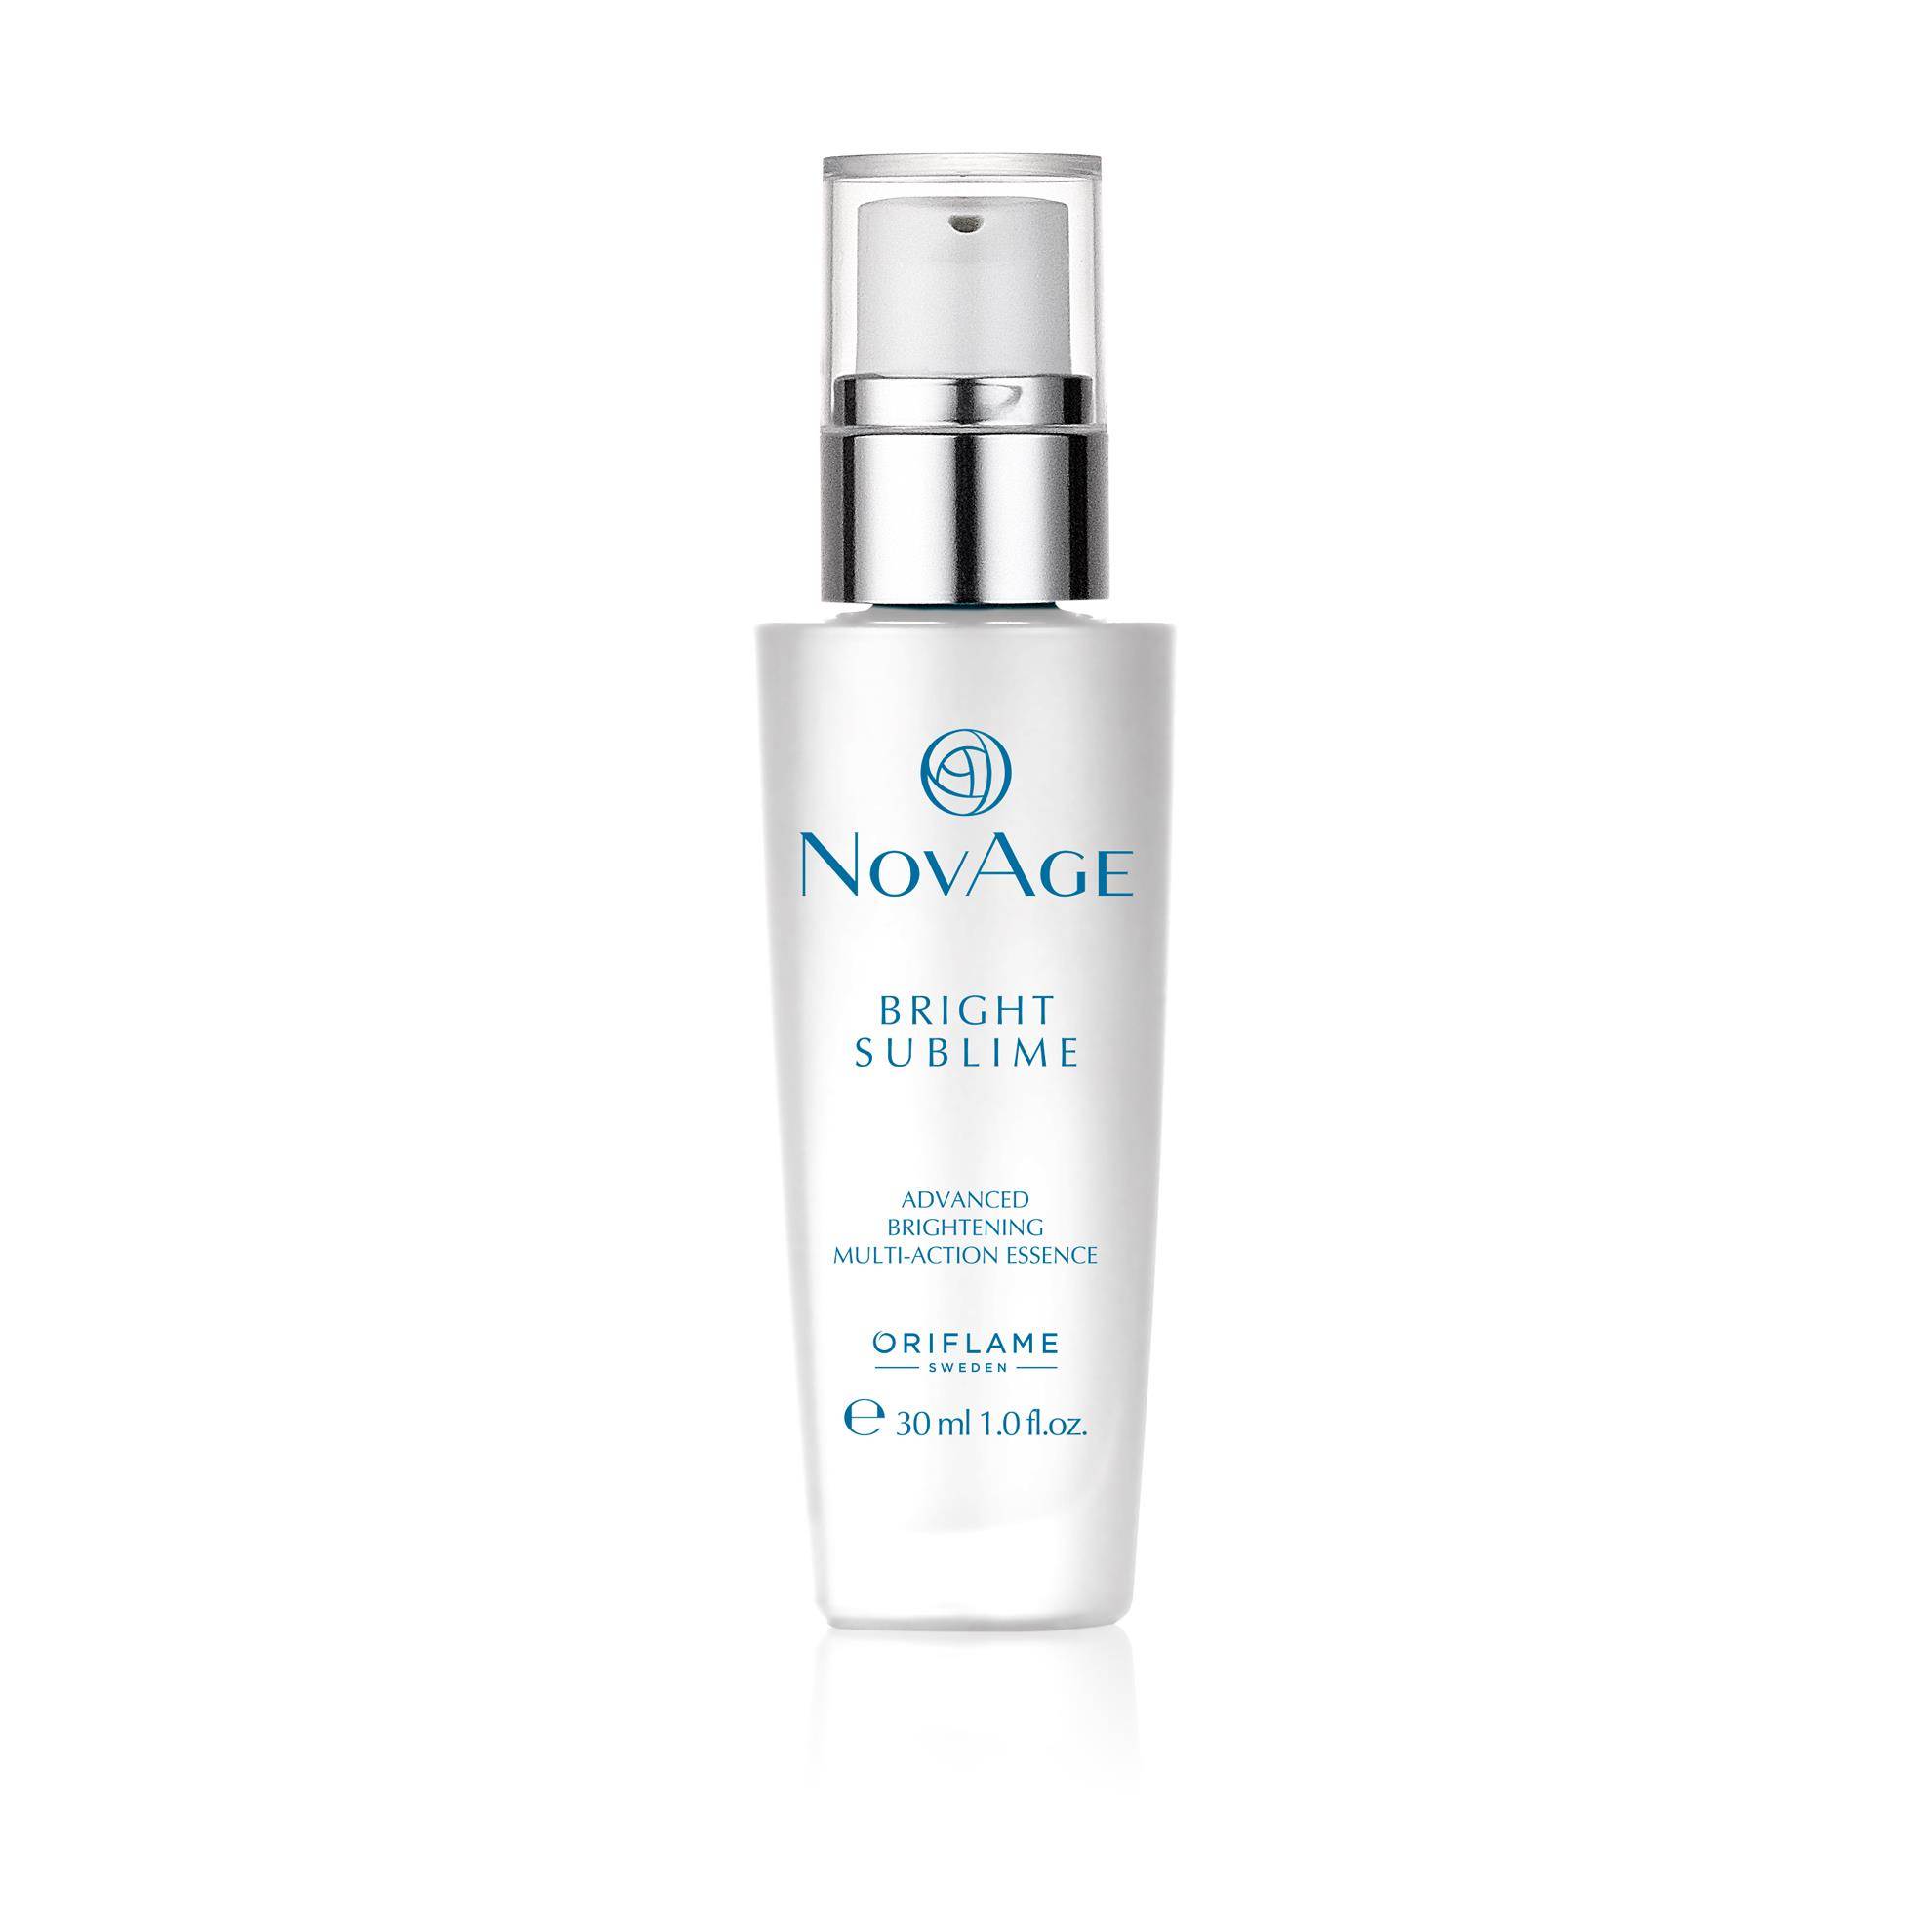 novage-bright-sublime-advance-brightening-multi-action-assence-32805